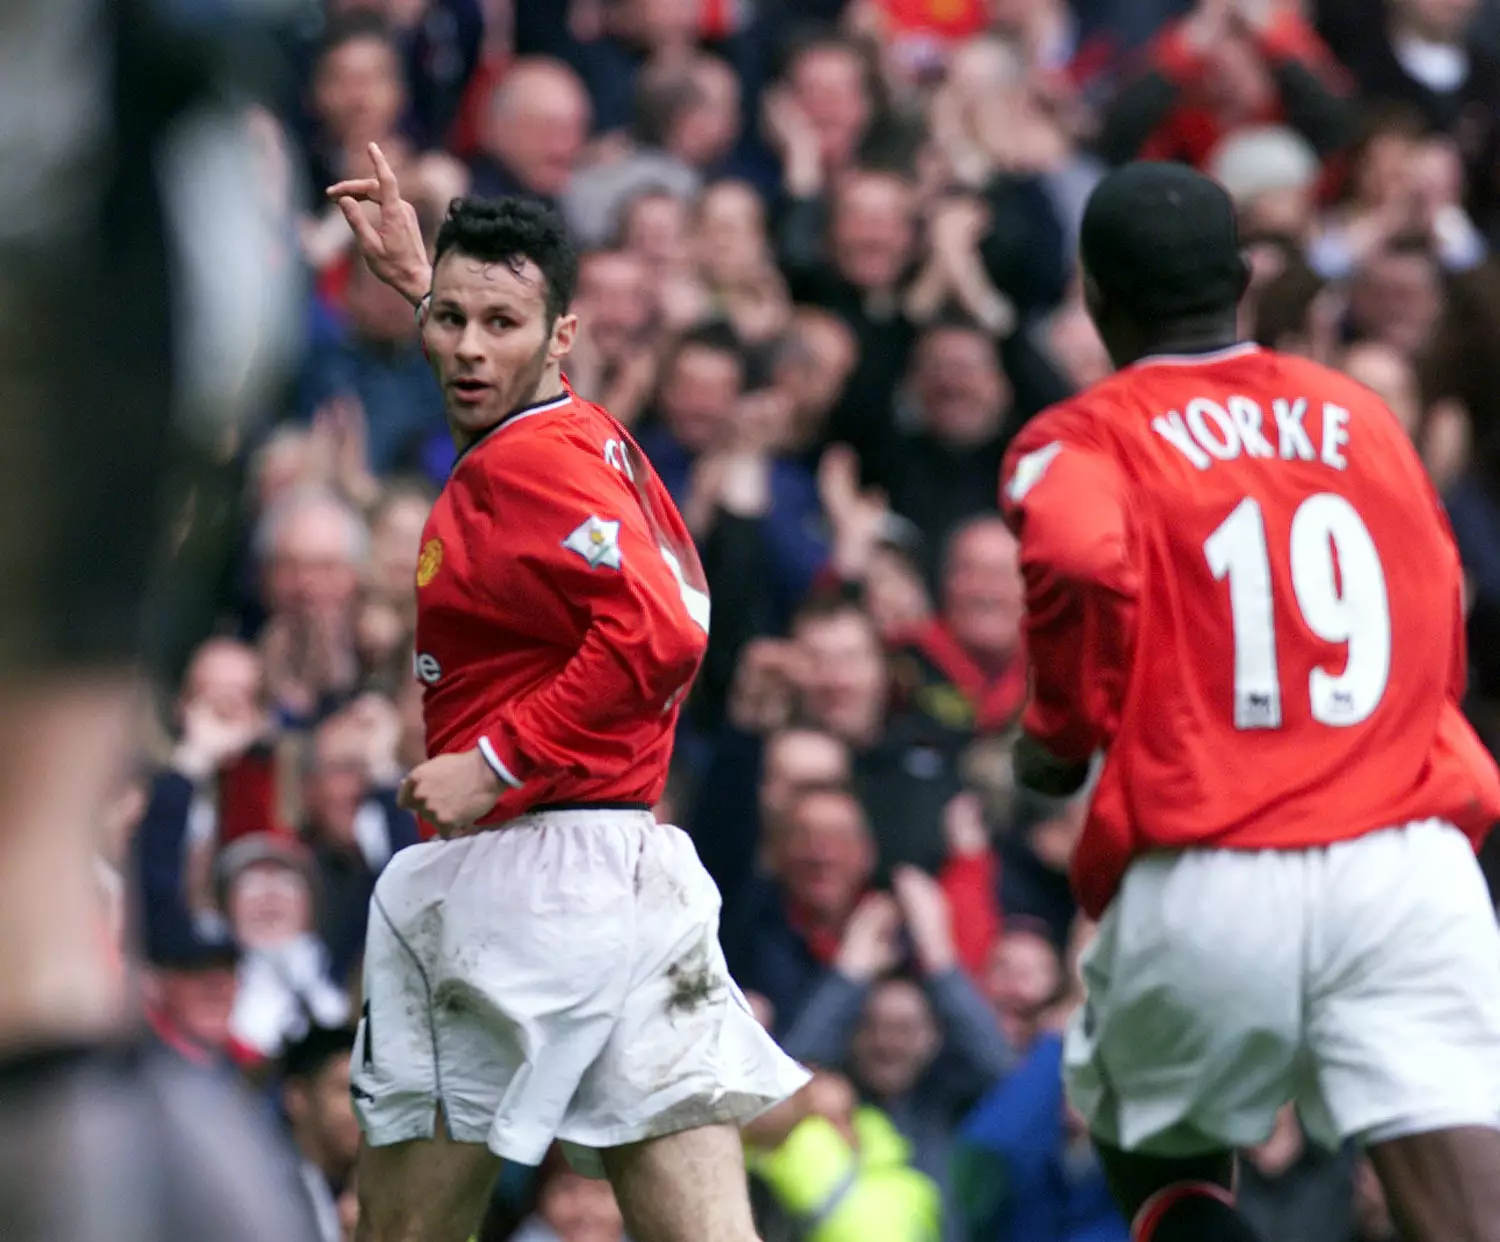 Ryan Giggs celebrates his goal against Coventry in United's record breaking season. Image: PA Images